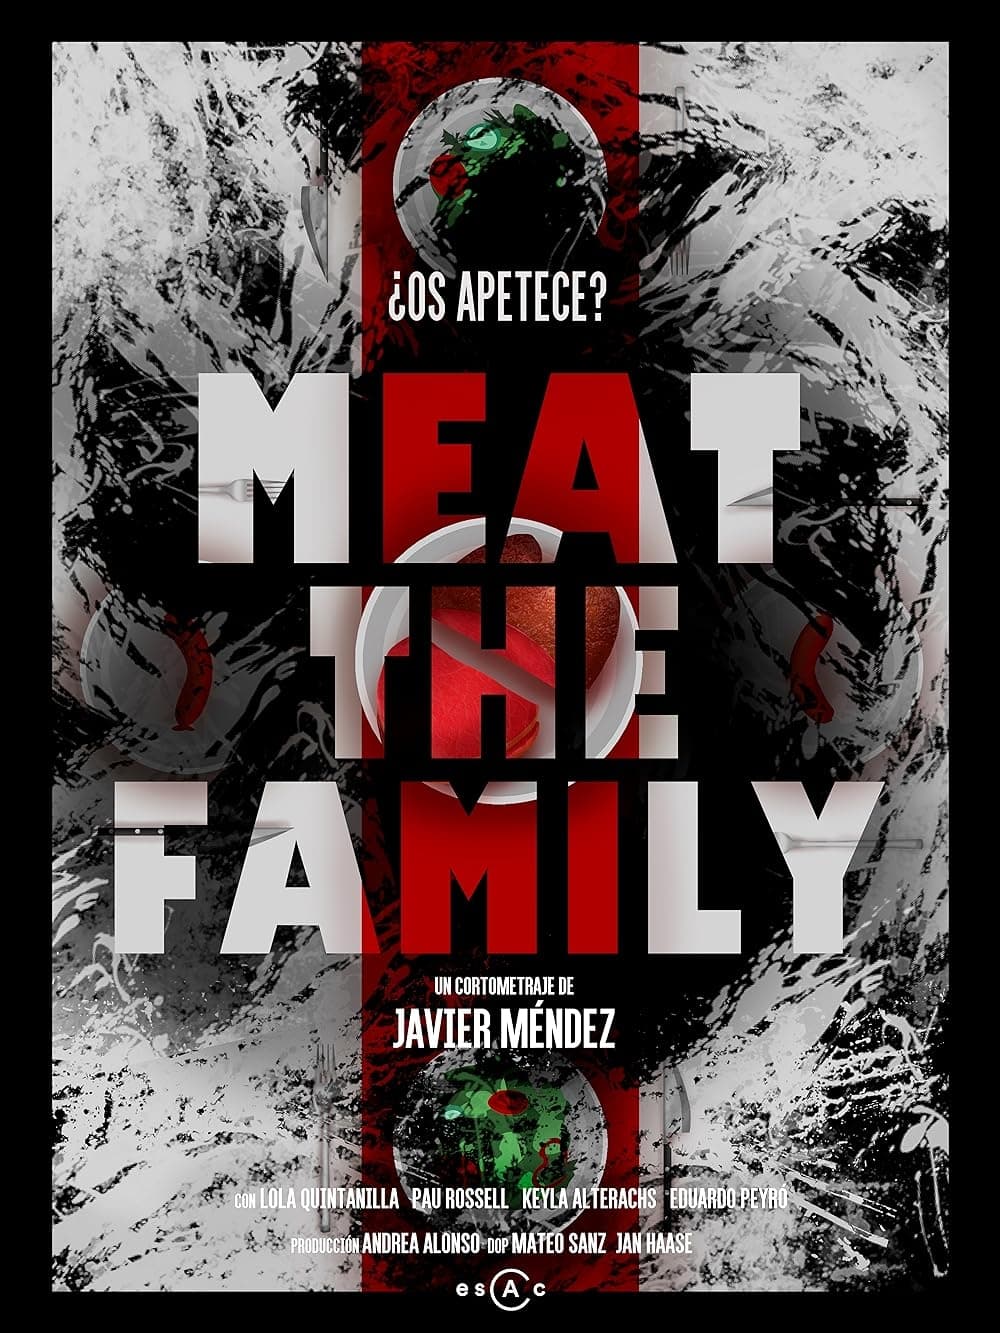 Meat the Family